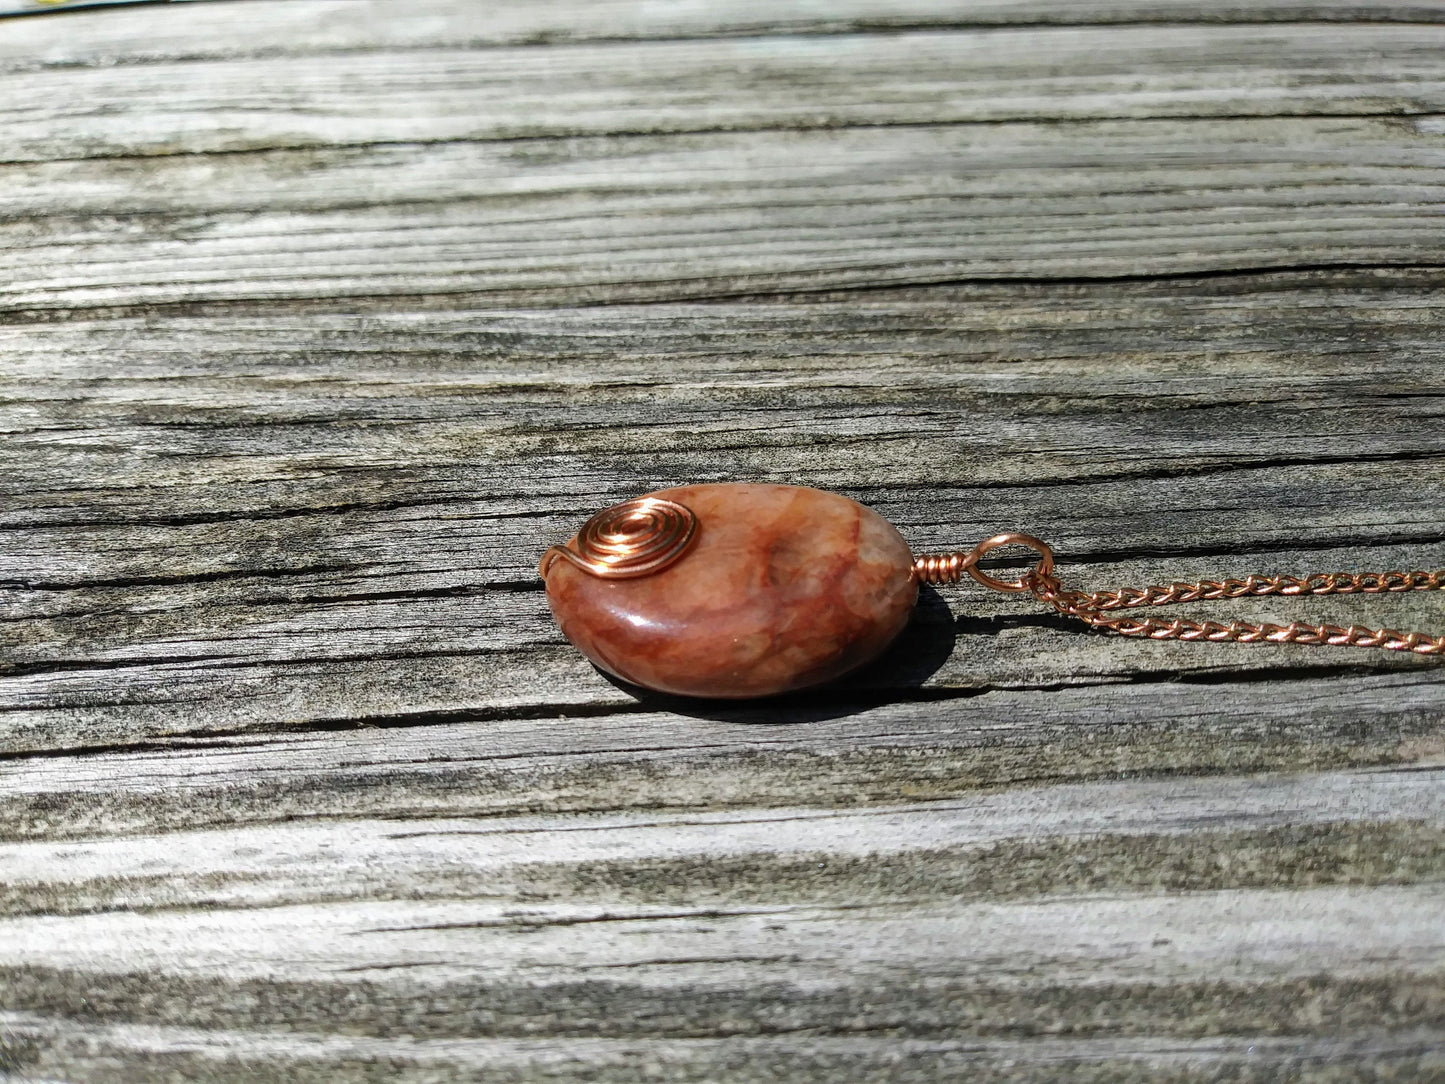 Upcycled Brown Agate Pendant w Copper Spiral Wire Wrap